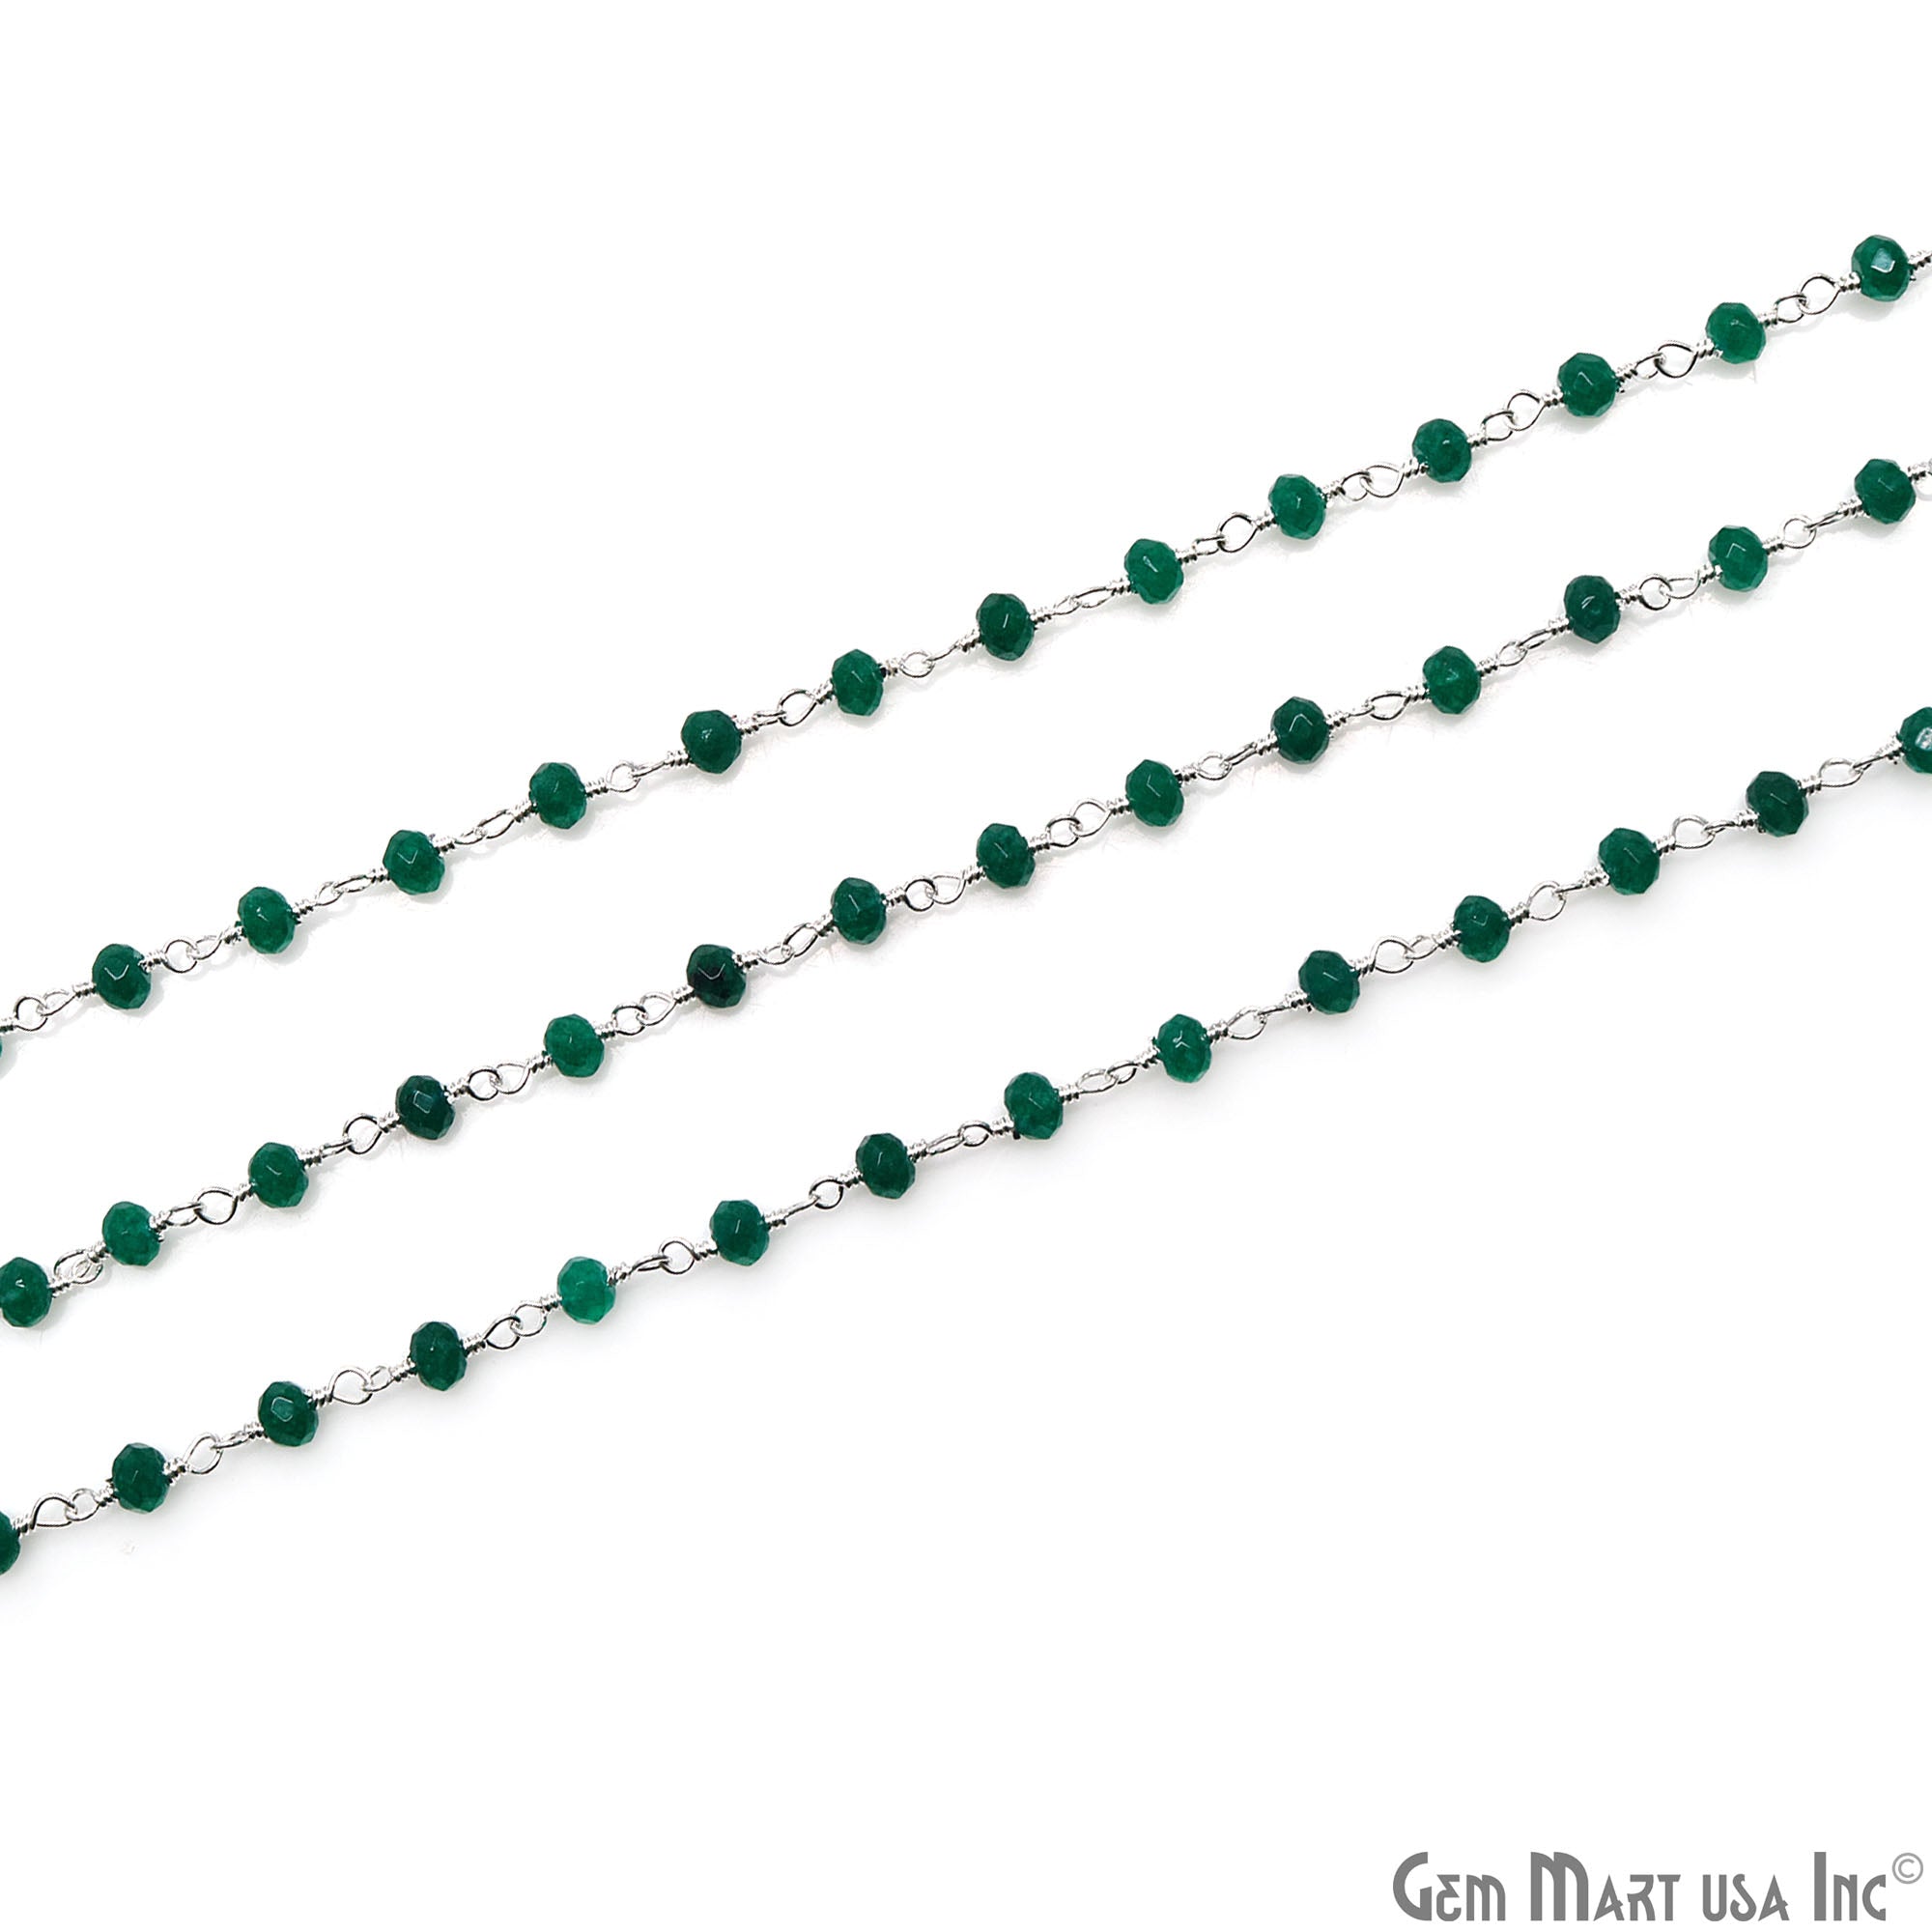 Emerald Jade Beads 3-3.5mm Silver Plated Wire Wrapped Rosary Chain